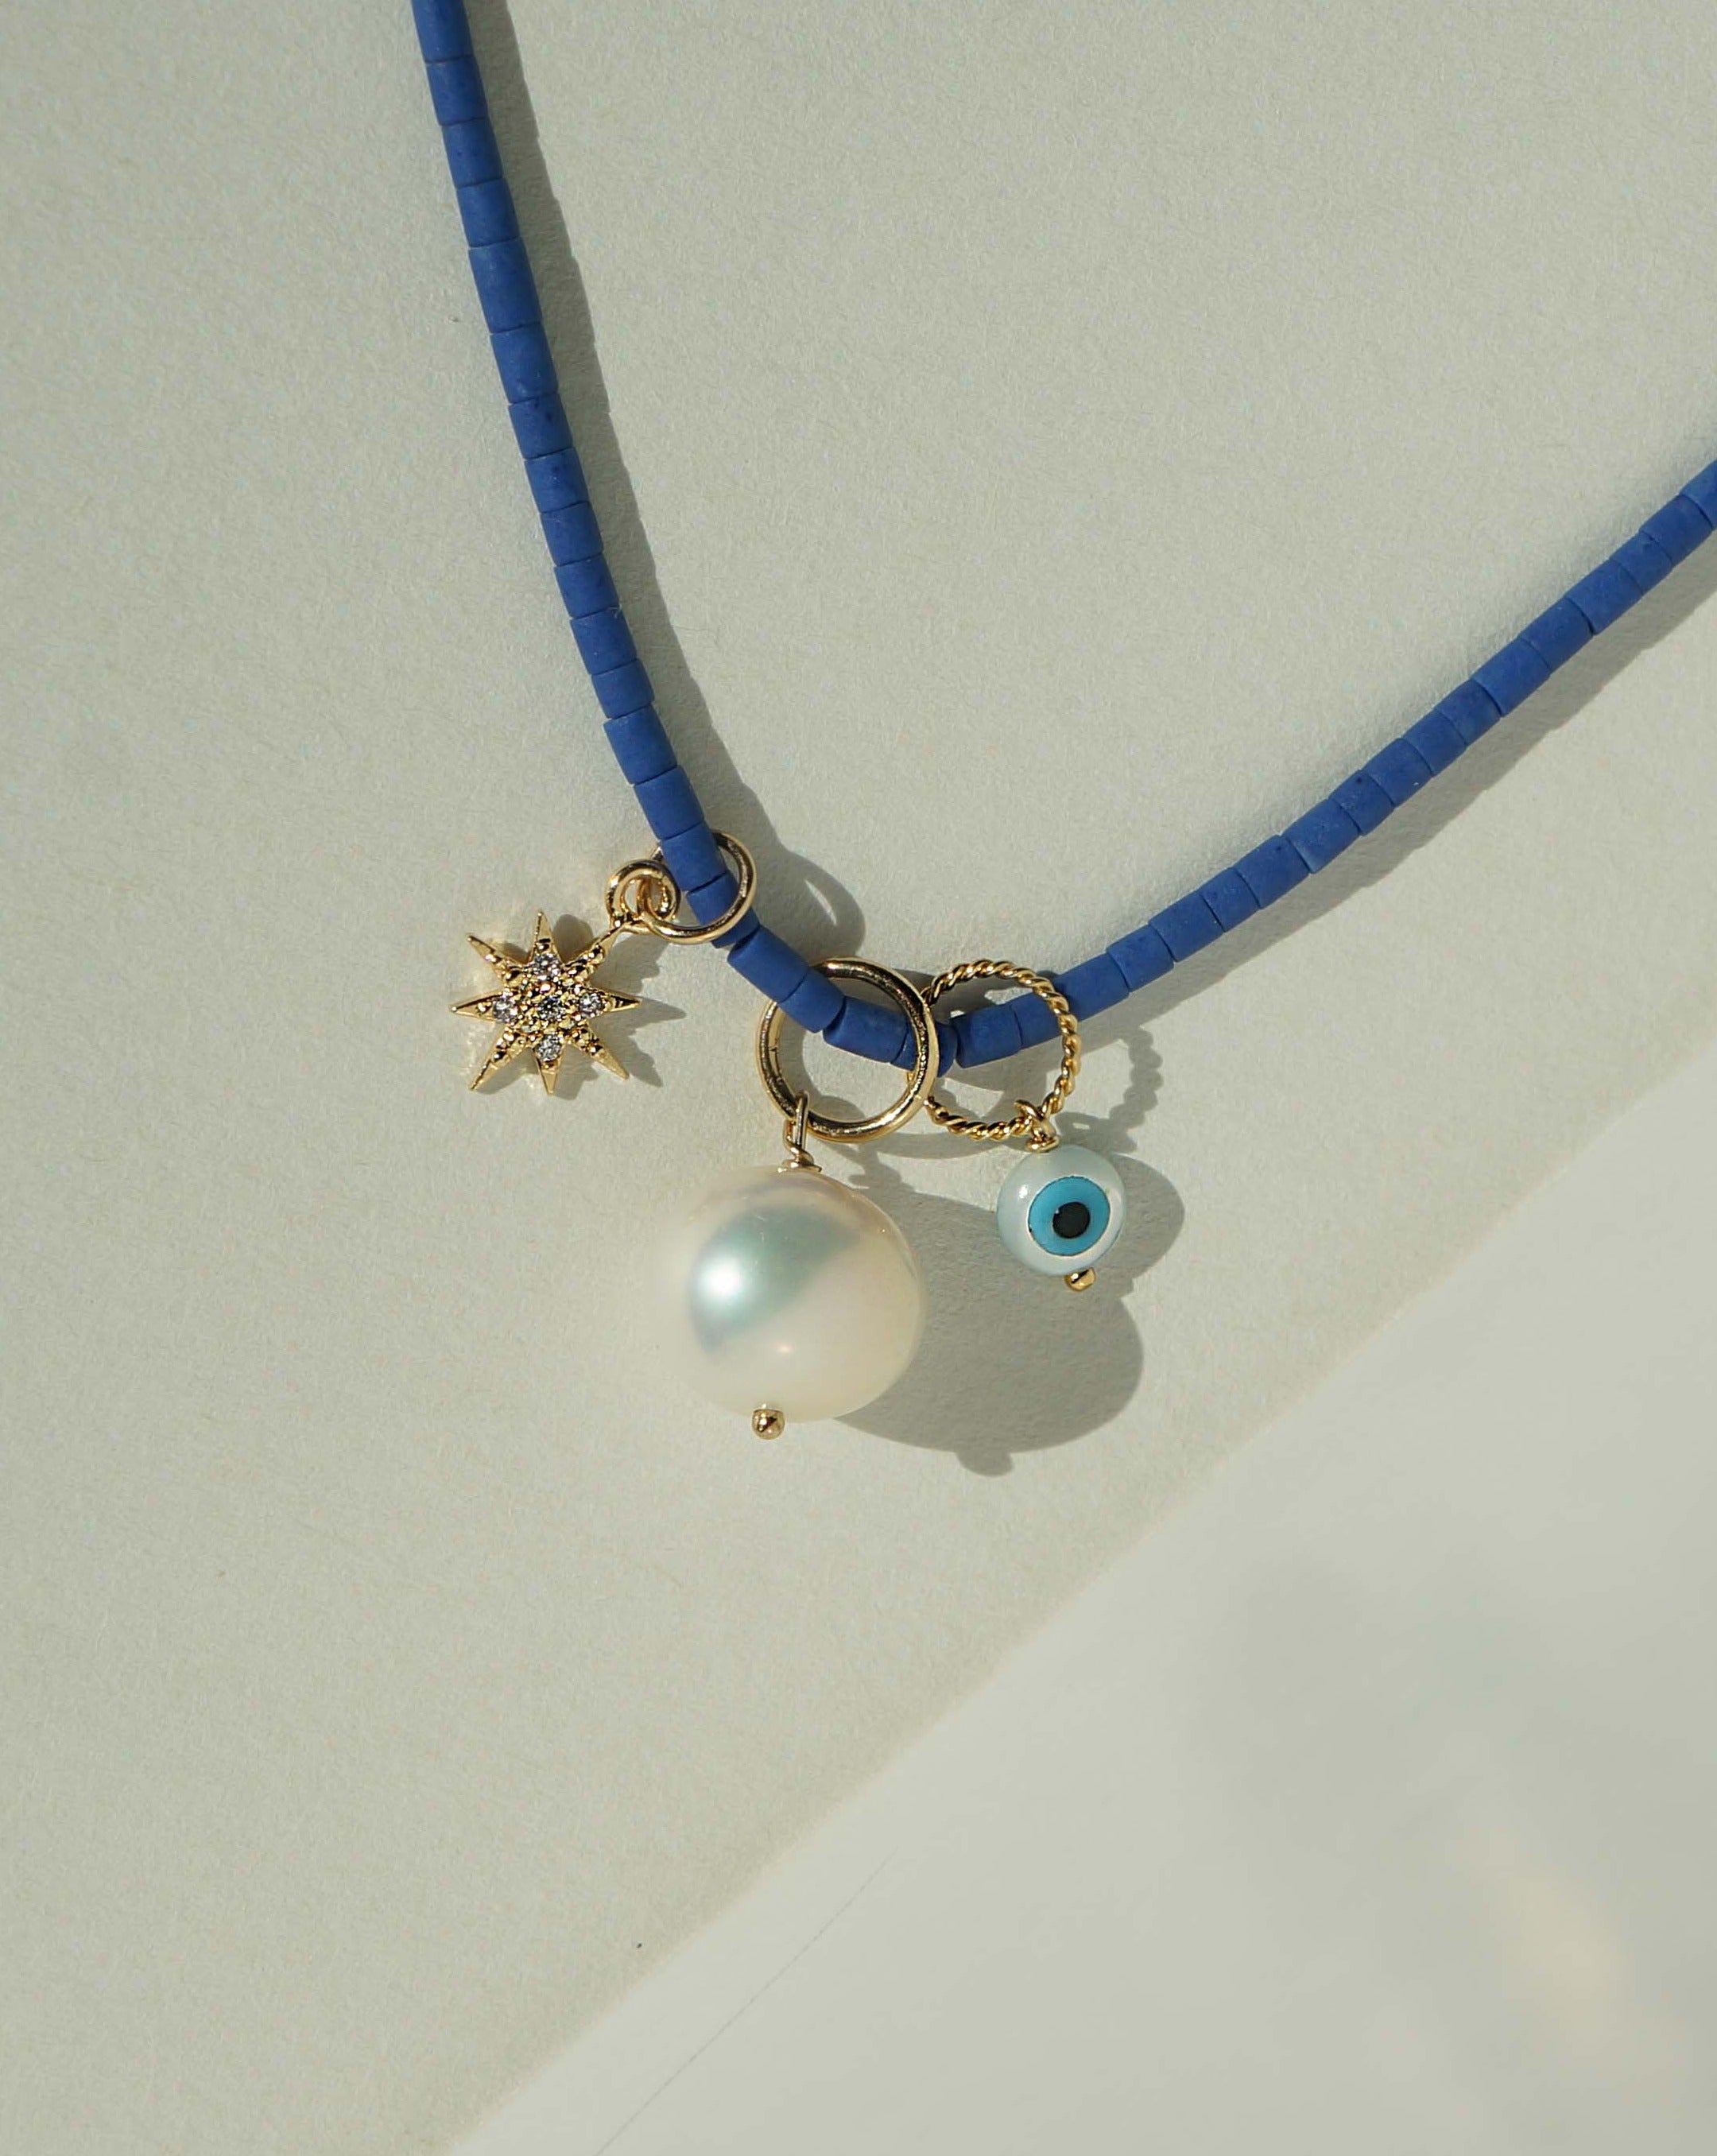 Brook Dark Blue Necklace by KOZAKH. A 13 to 16 inch adjustable length colored Afghan Beads strand necklace in 14K Gold Filled, featuring a hand carved Mother of Pearl evil eye charm, a round Freshwater Pearl, and a Cubic Zirconia encrusted star charm.